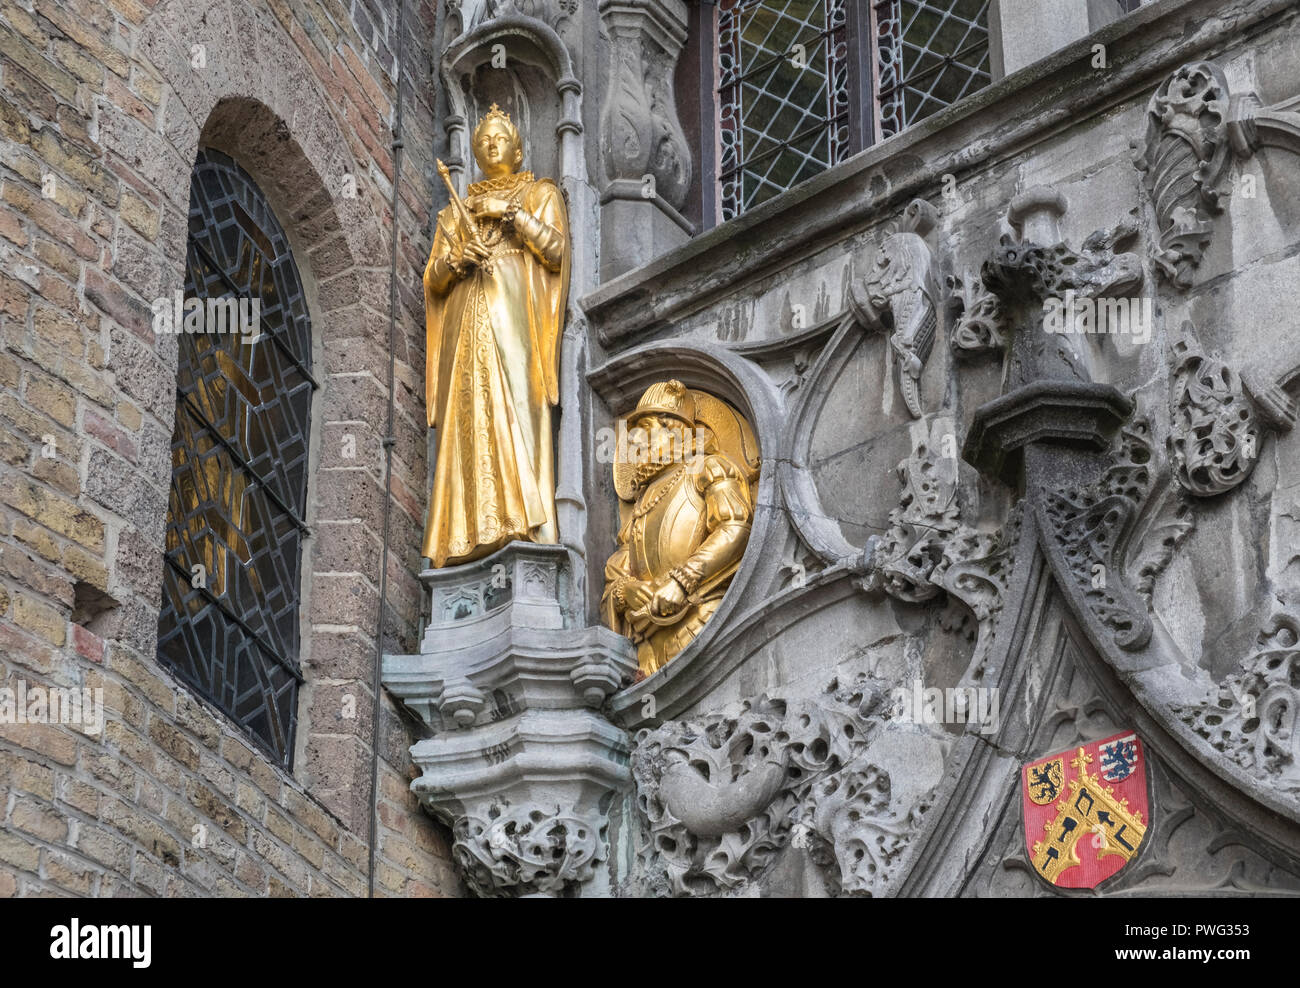 Exterior architectural details of the Basilica of the Holy Blood church, Markt, Bruges, Belgium Stock Photo